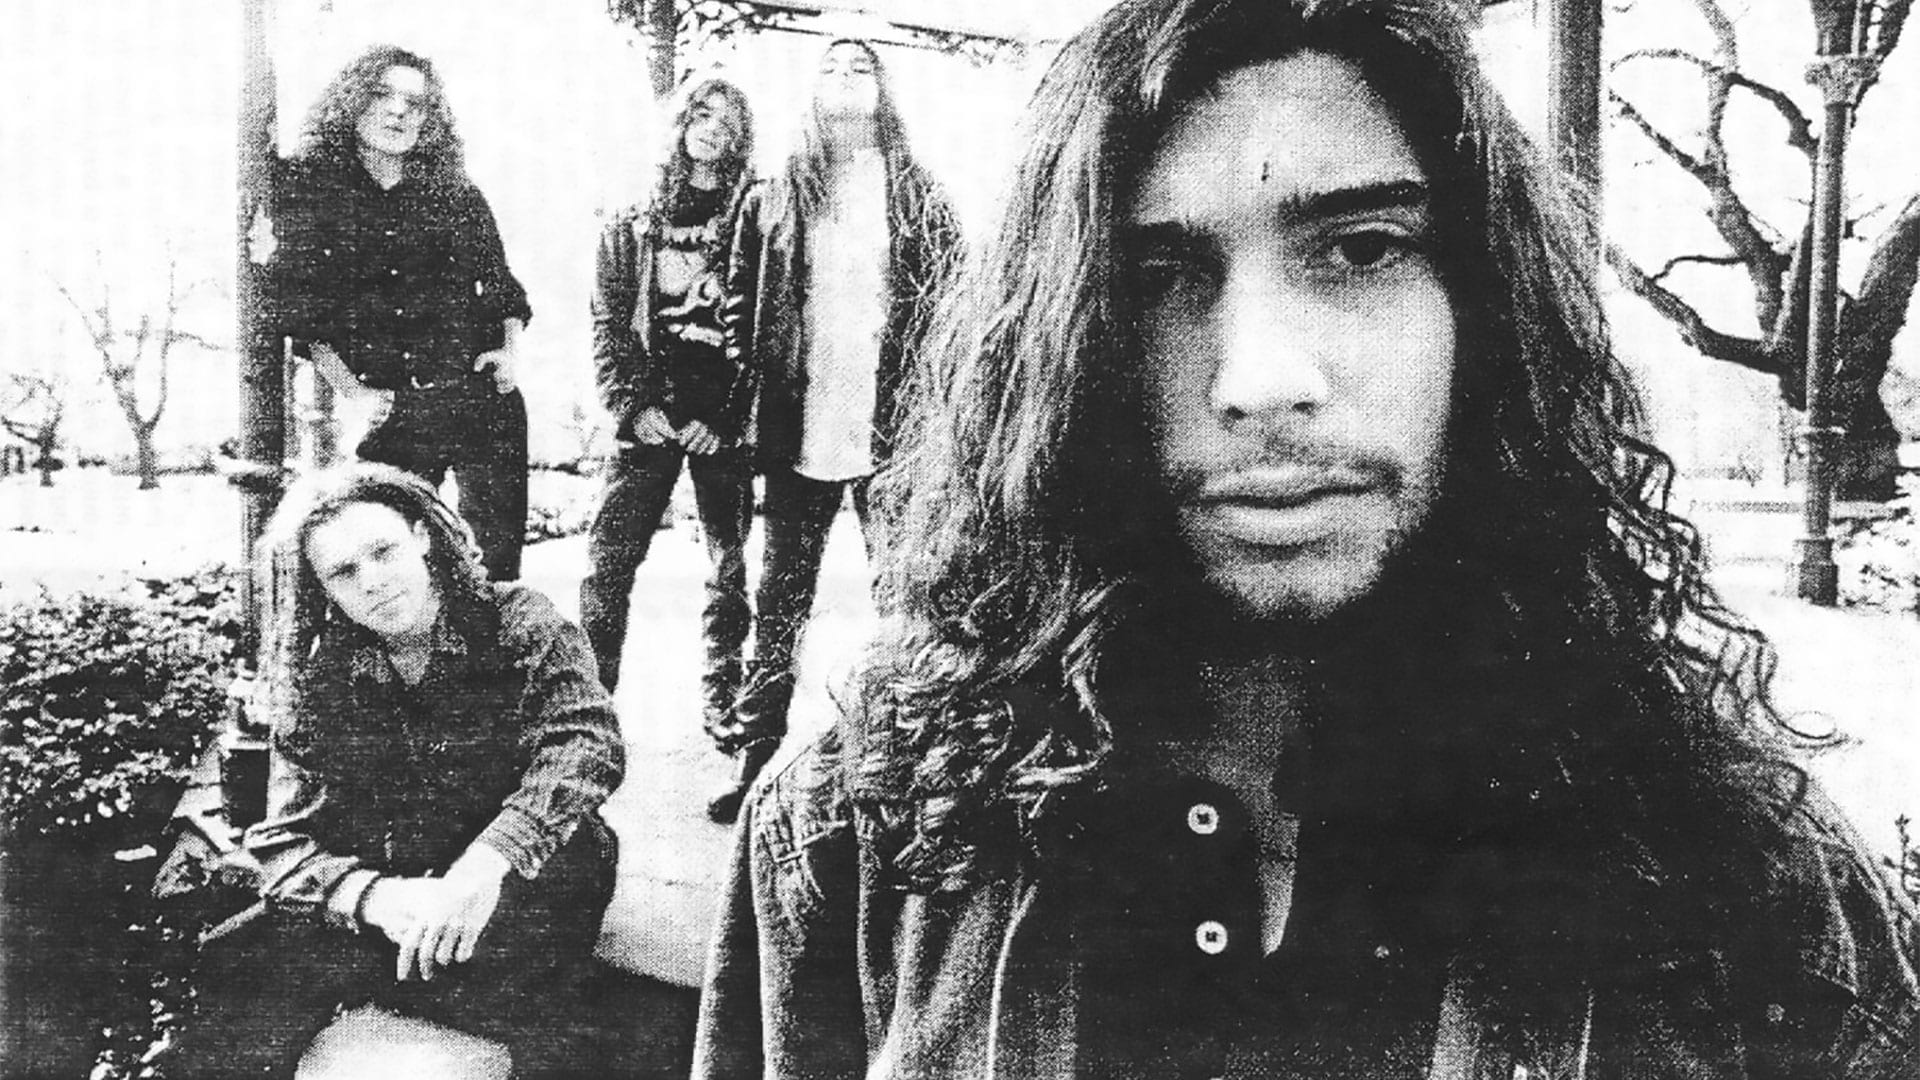 28 Years Ago: ANATHEMA complete An Iliad of Woes